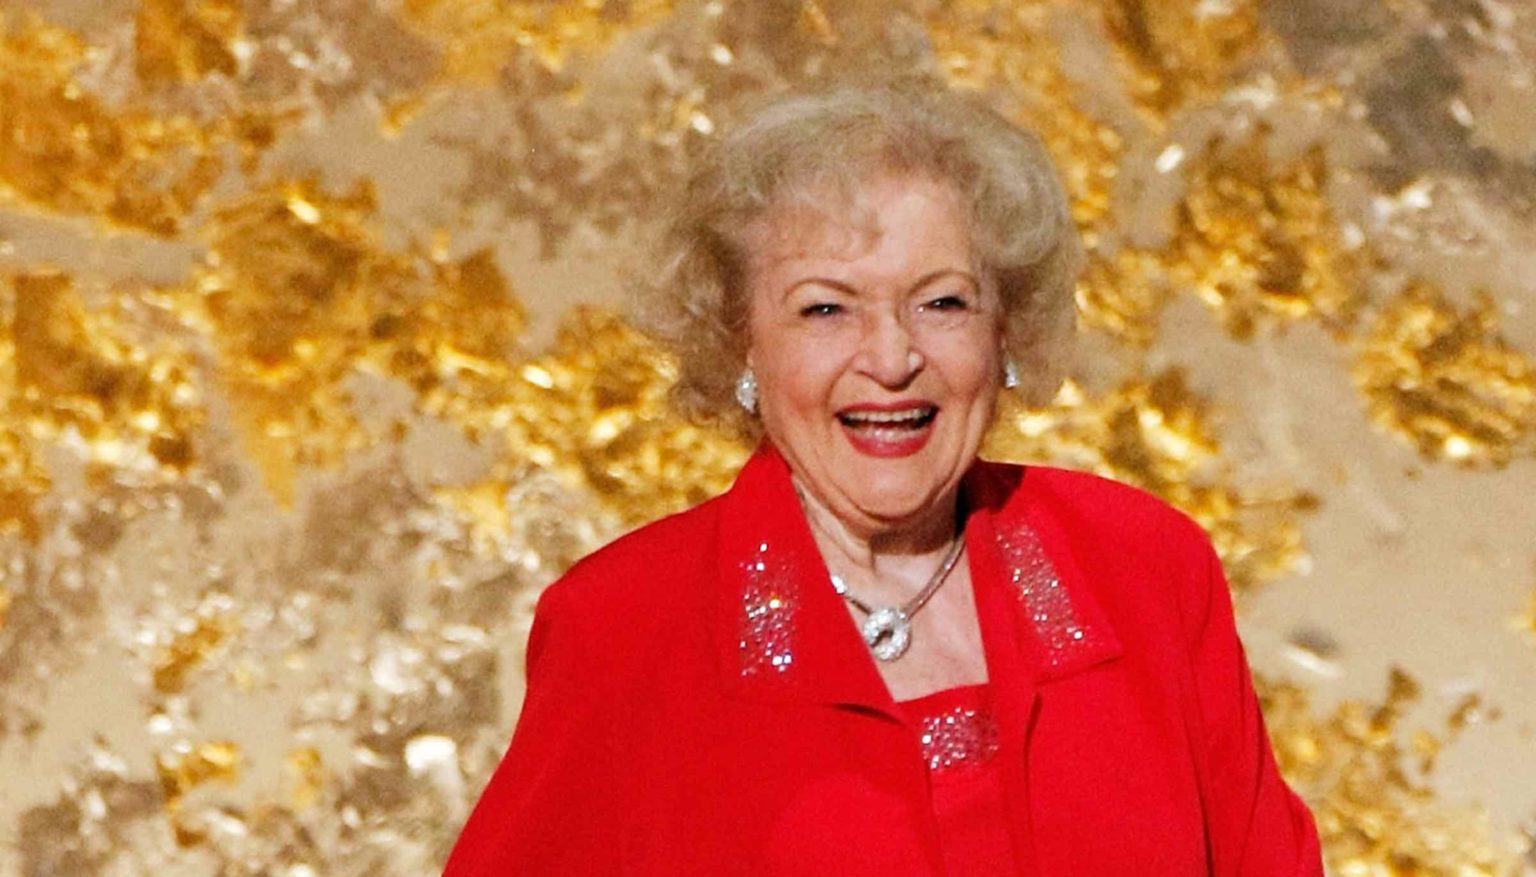 Is there a more beloved public figure than Betty White? Betty White is not dead but very much alive. Here's Betty White's greatest moments.